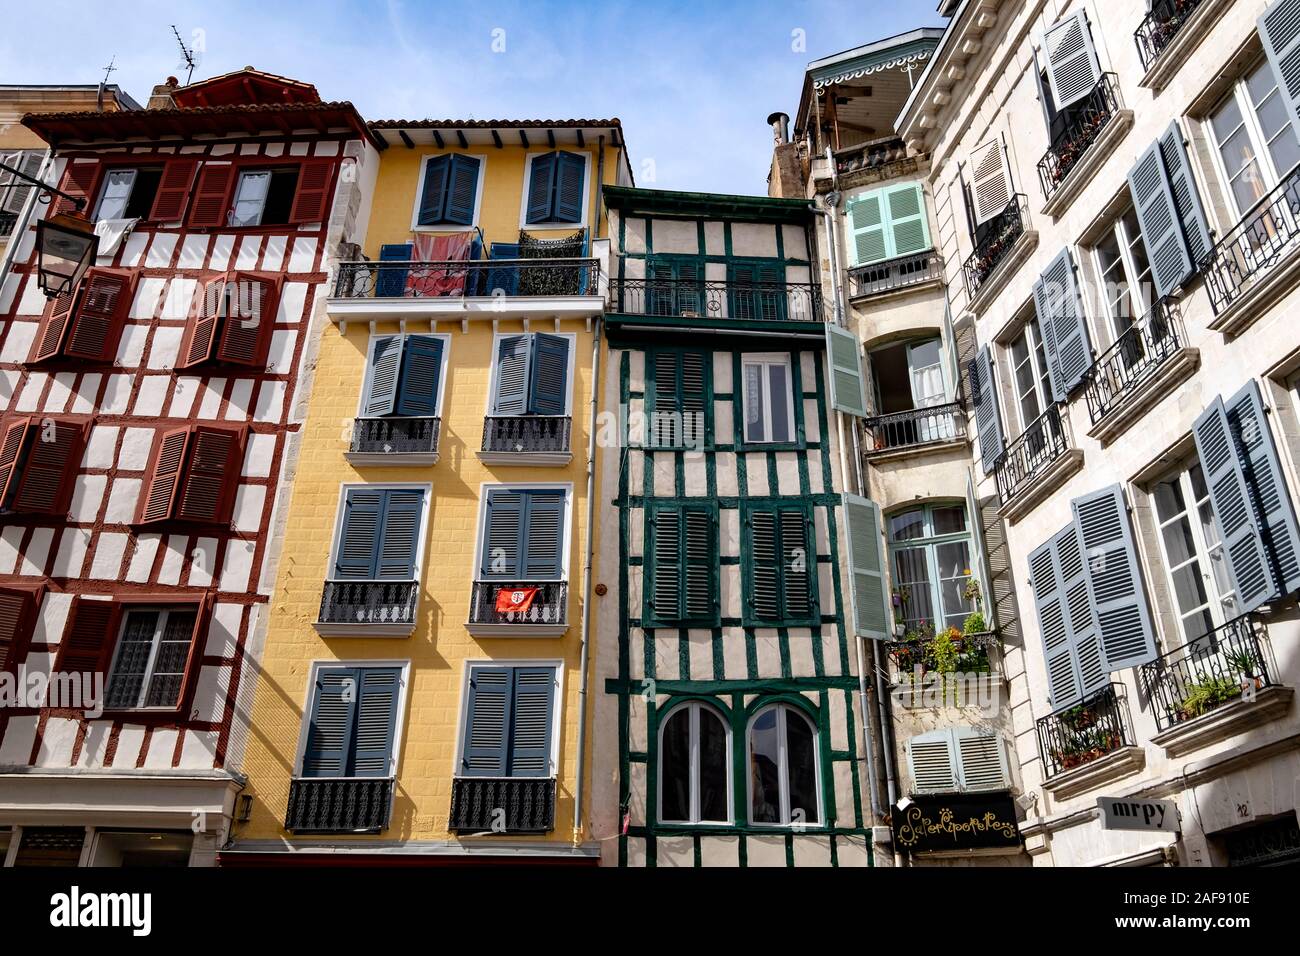 Traditional houses along Rue Argenterie, Bayonne, Pyrenees Atlantiques, Basque Country, France, Europe Stock Photo